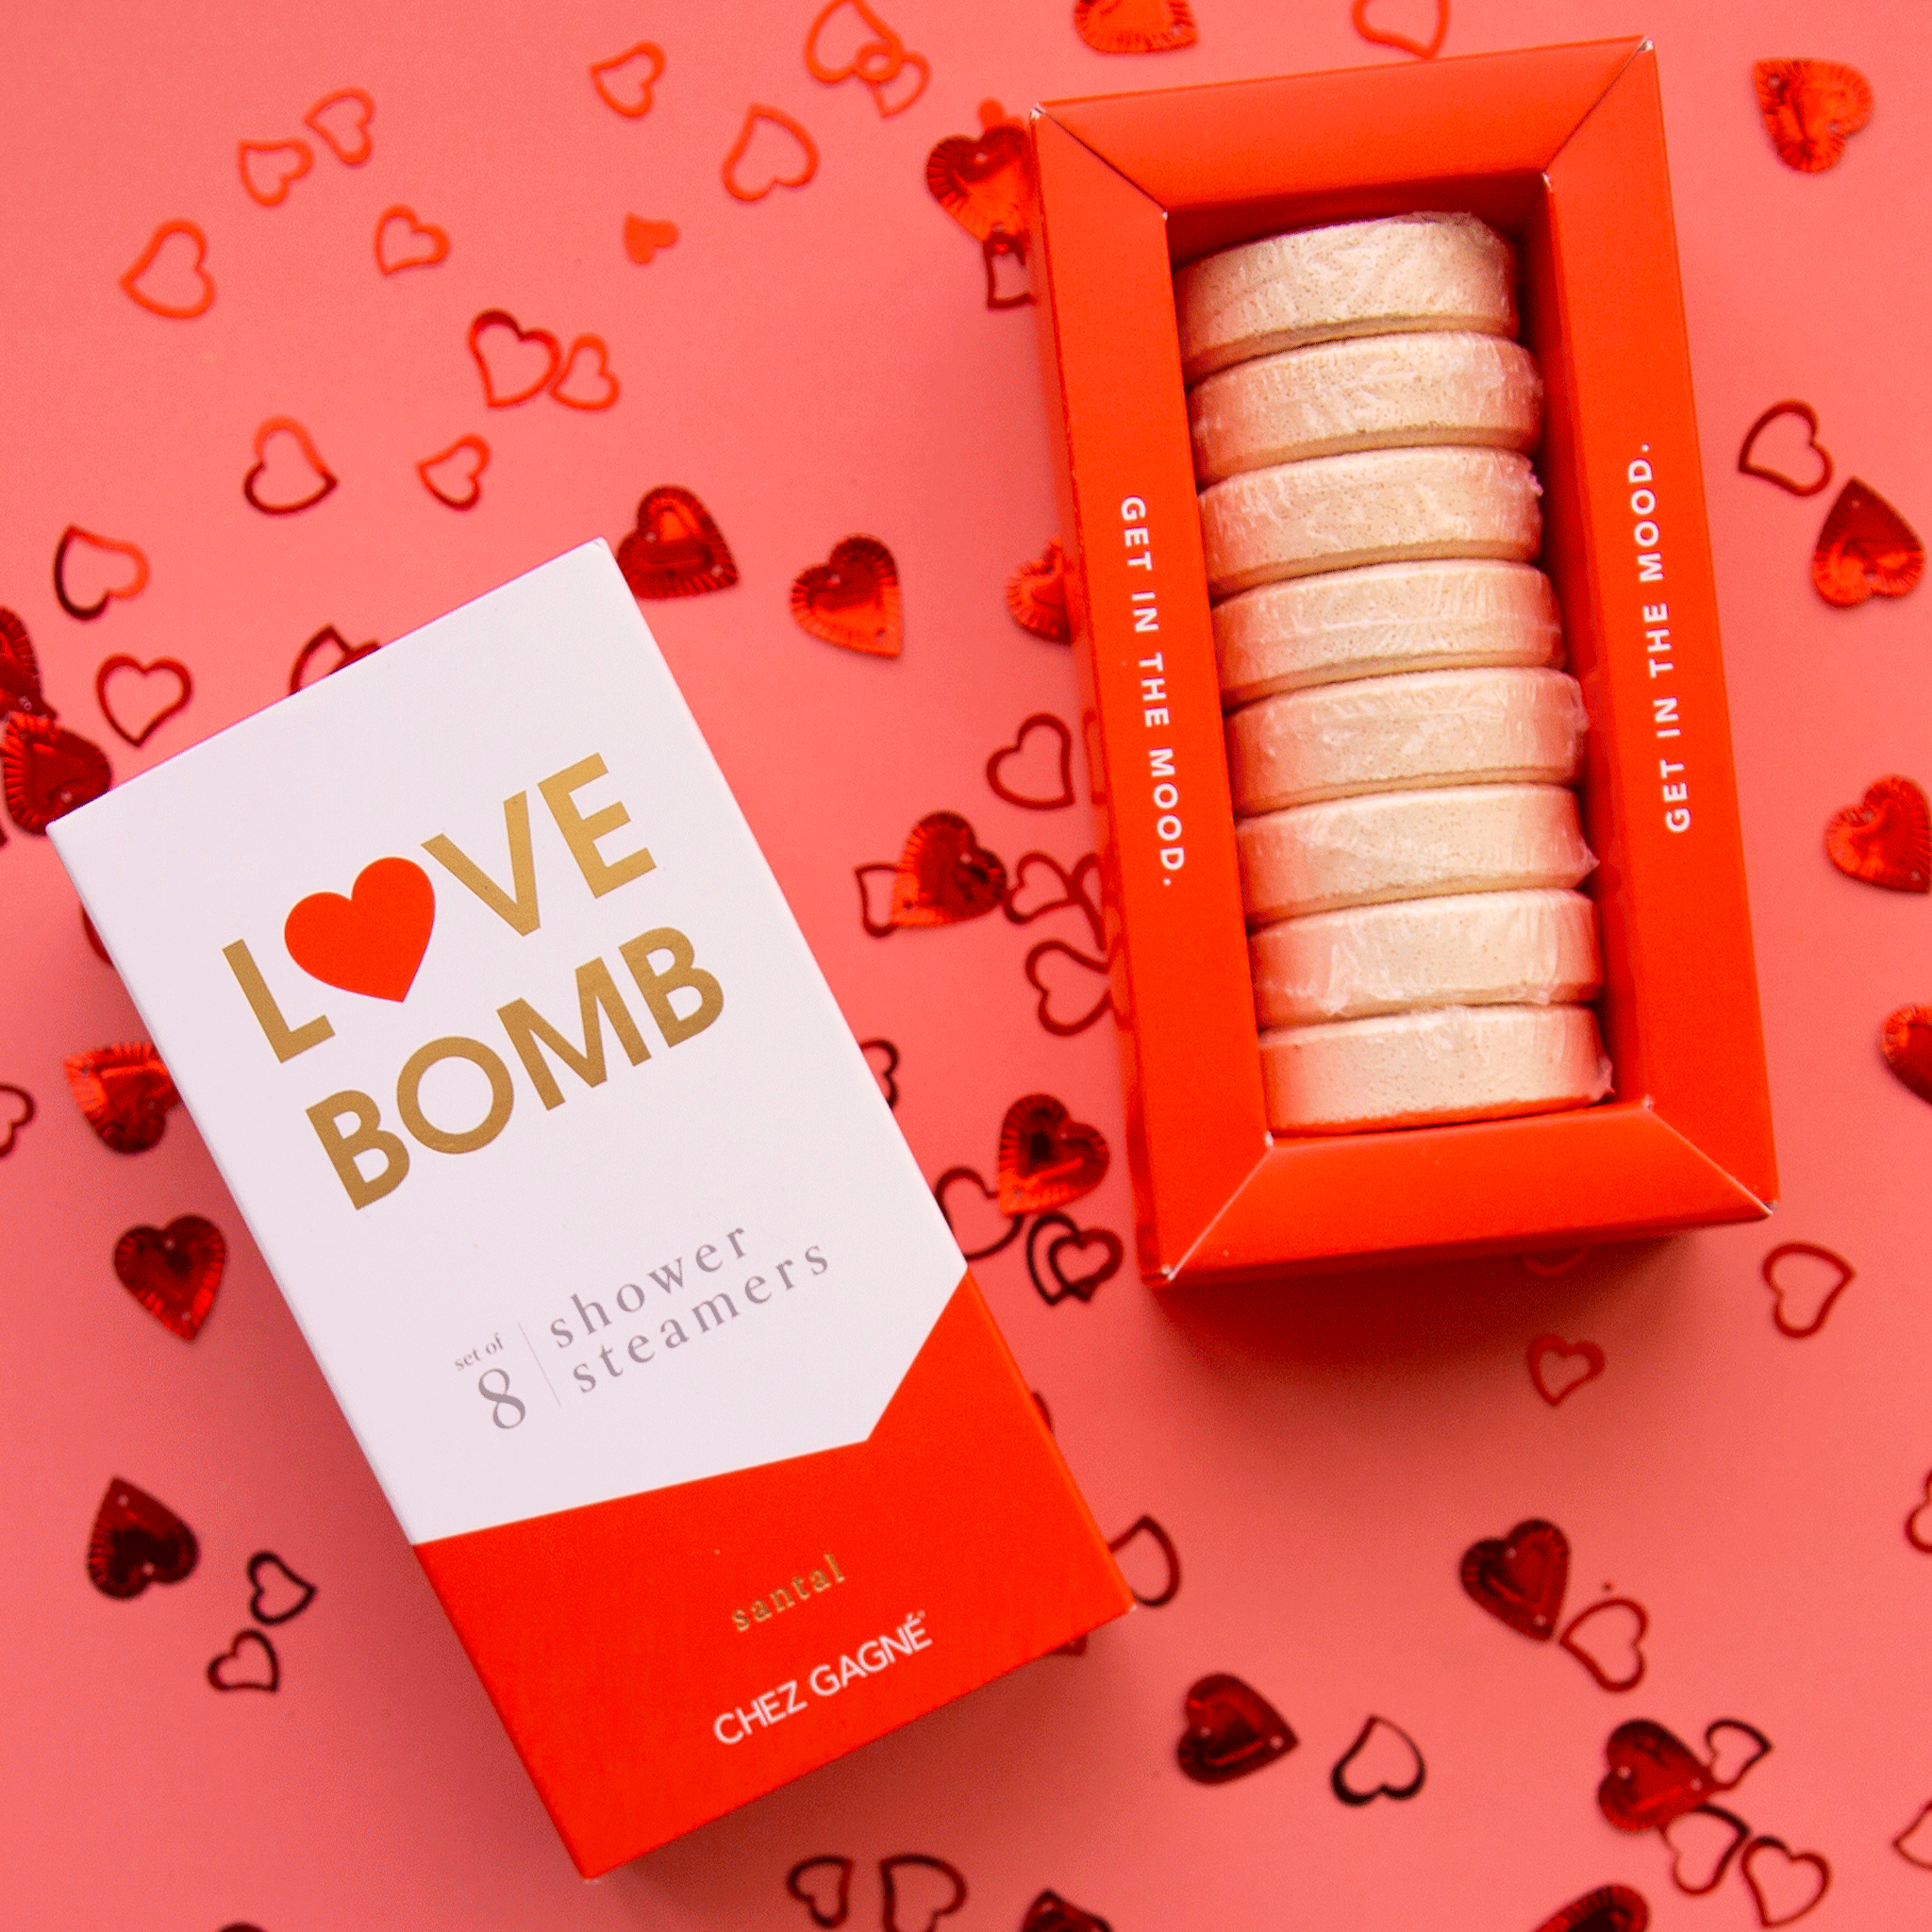 On a red background is a white and red box of shower steaming tablets with text at the top that reads, "Love Bomb 8 Shower Steamers".